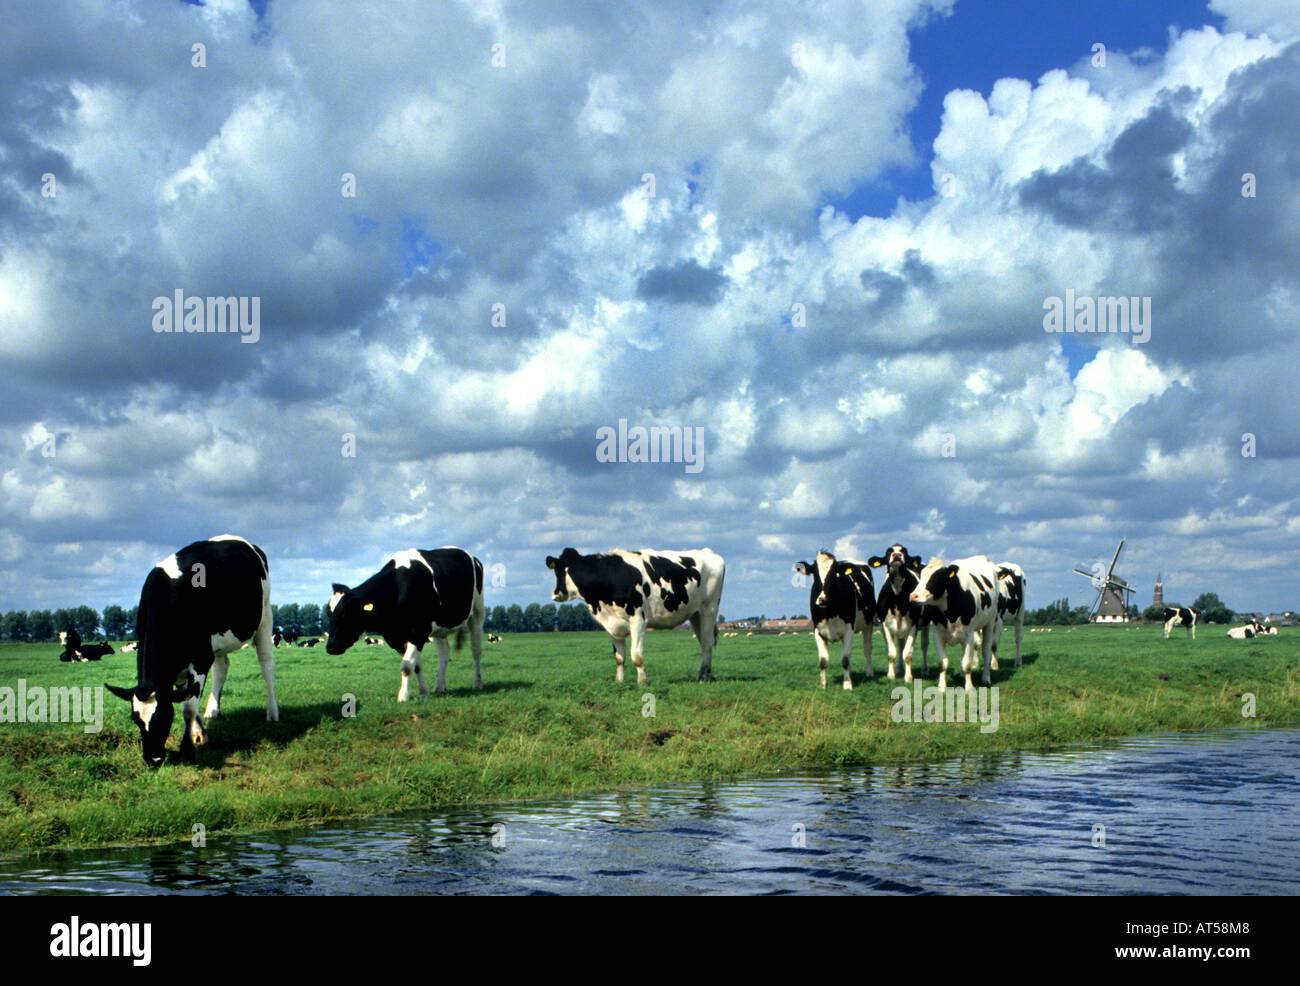 North South Holland cow cows Netherlands Holland Farmer Farm agriculture Stock Photo